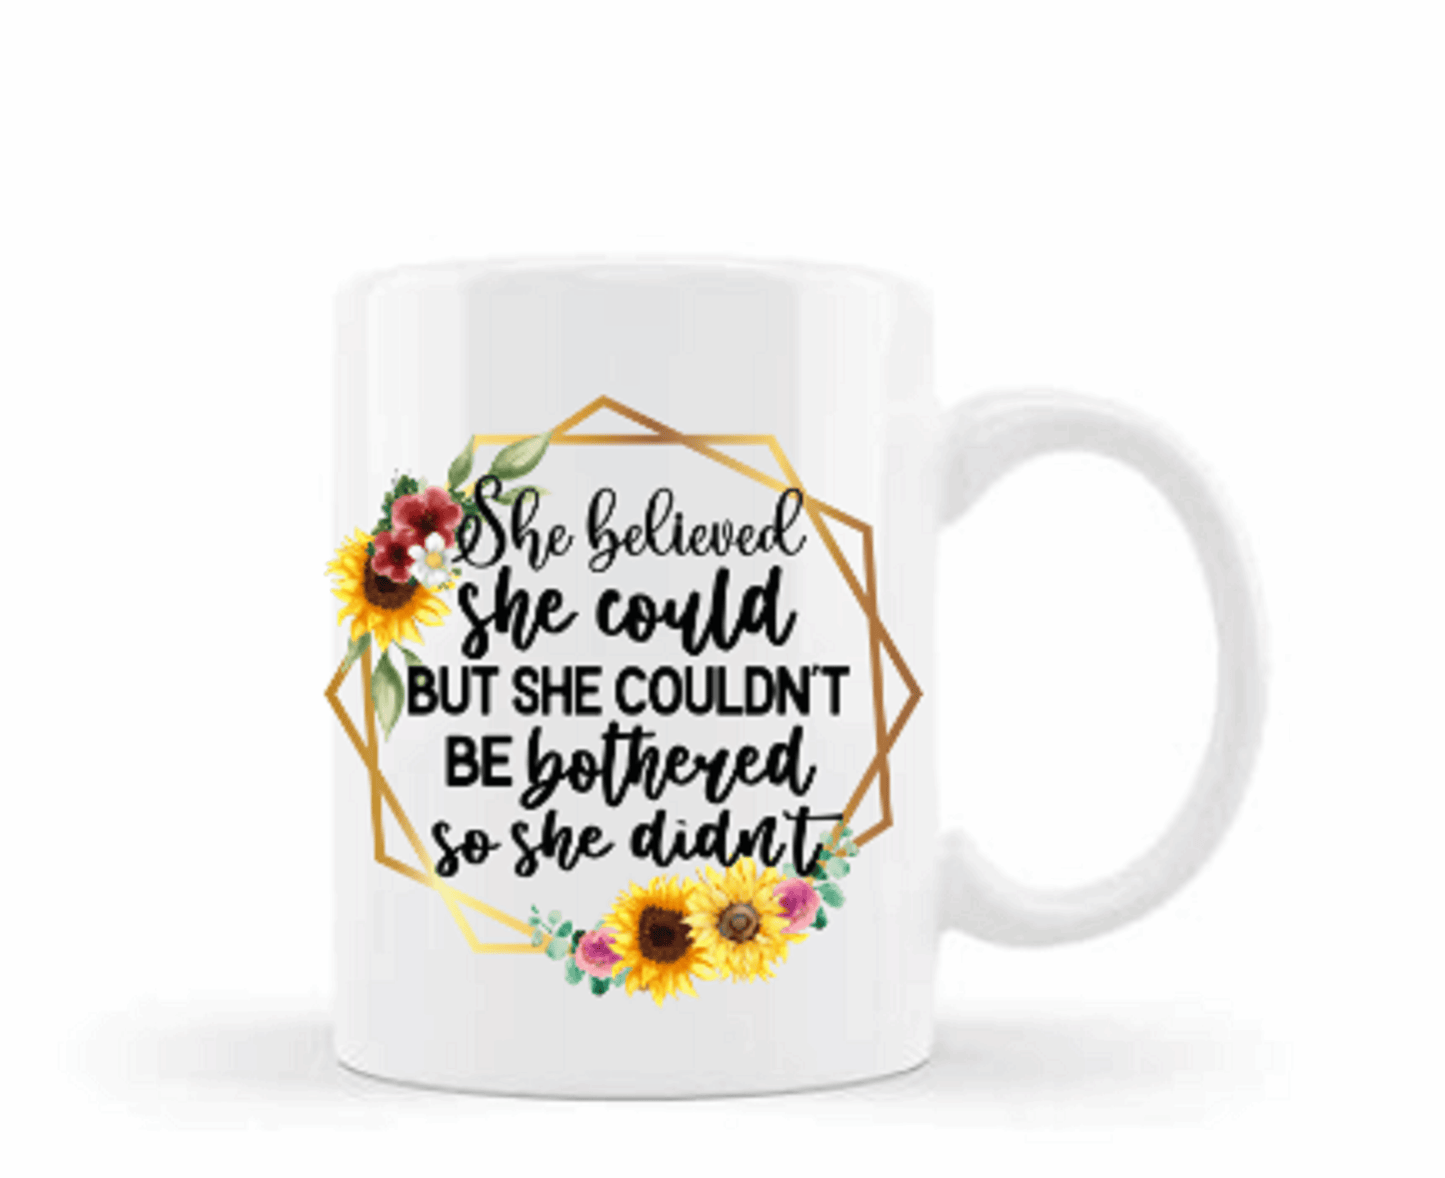  She Belived She Could Coffee Mug by Free Spirit Accessories sold by Free Spirit Accessories